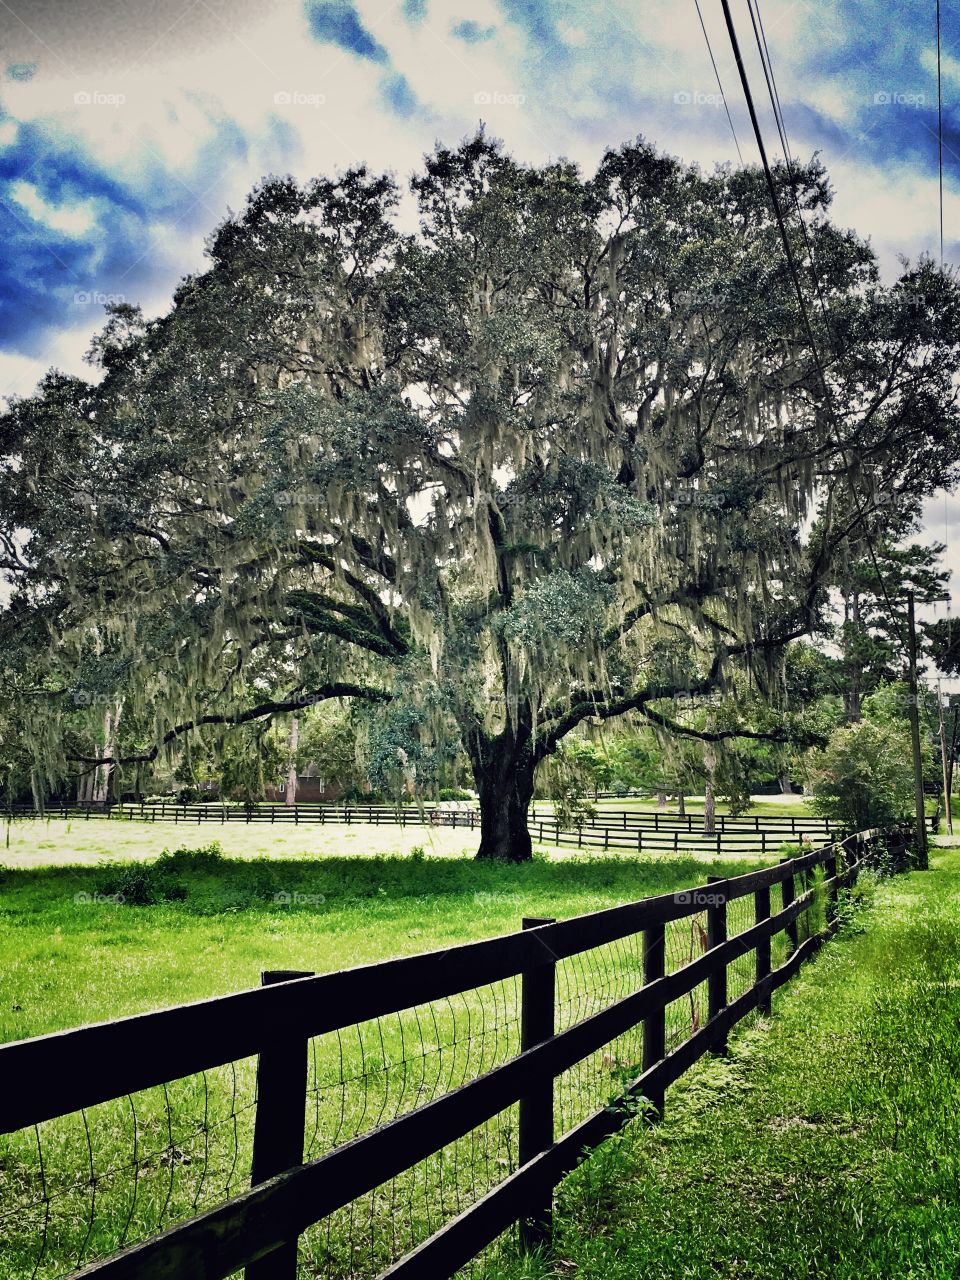 Trees in fenced pasture